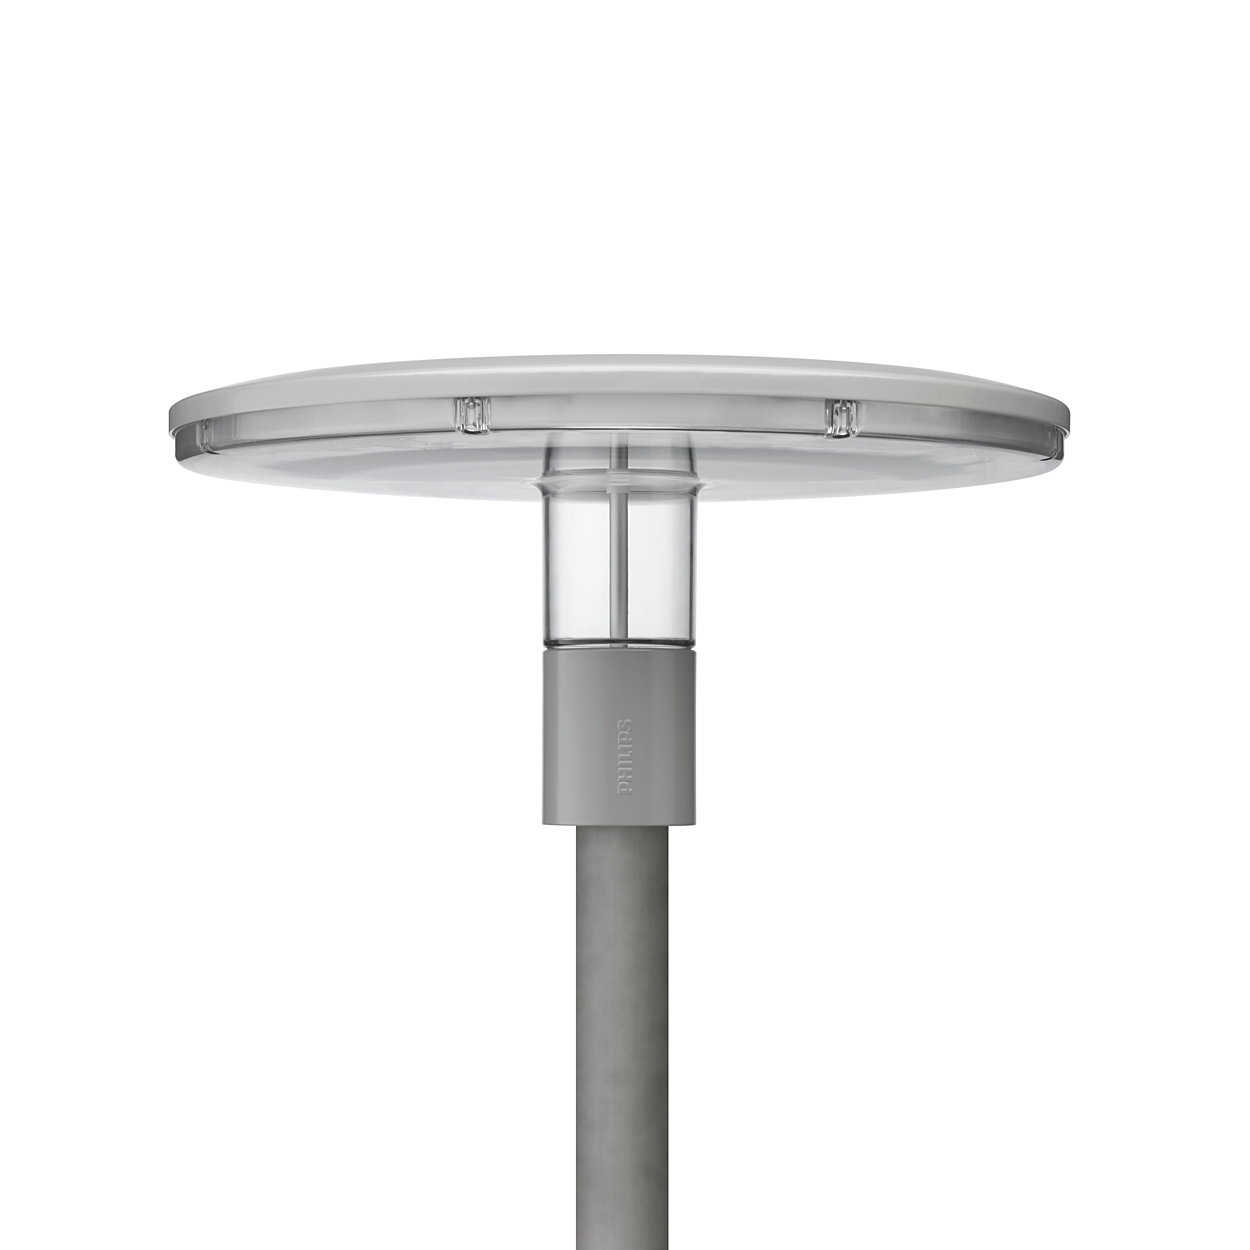 Philips TownGuide Performer – flexible, modern designs for every application need